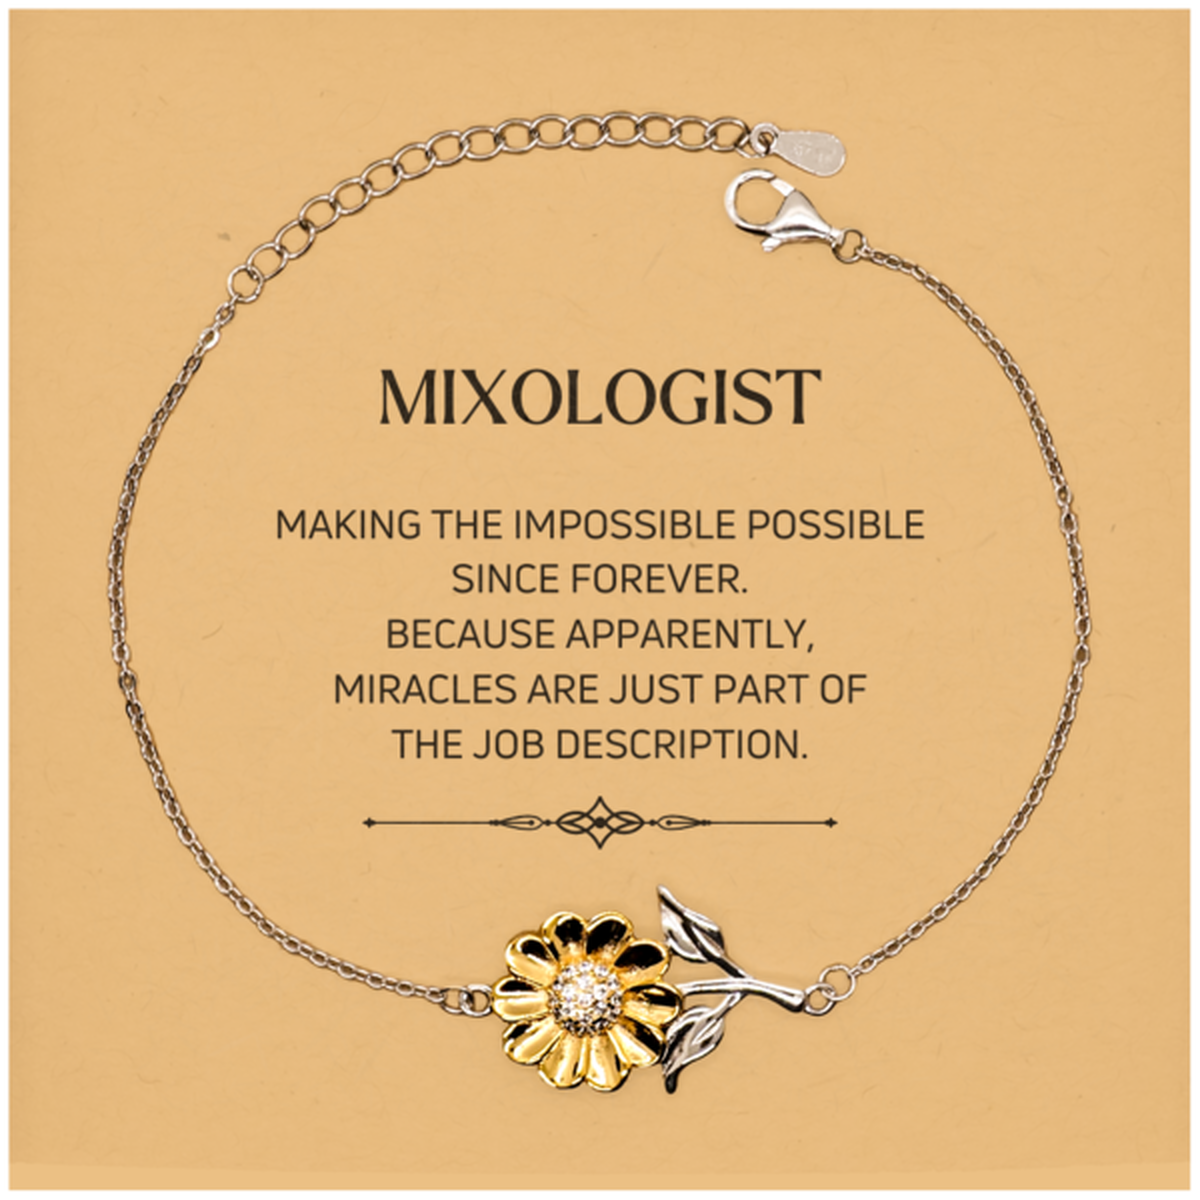 Funny Mixologist Gifts, Miracles are just part of the job description, Inspirational Birthday Christmas Sunflower Bracelet For Mixologist, Men, Women, Coworkers, Friends, Boss